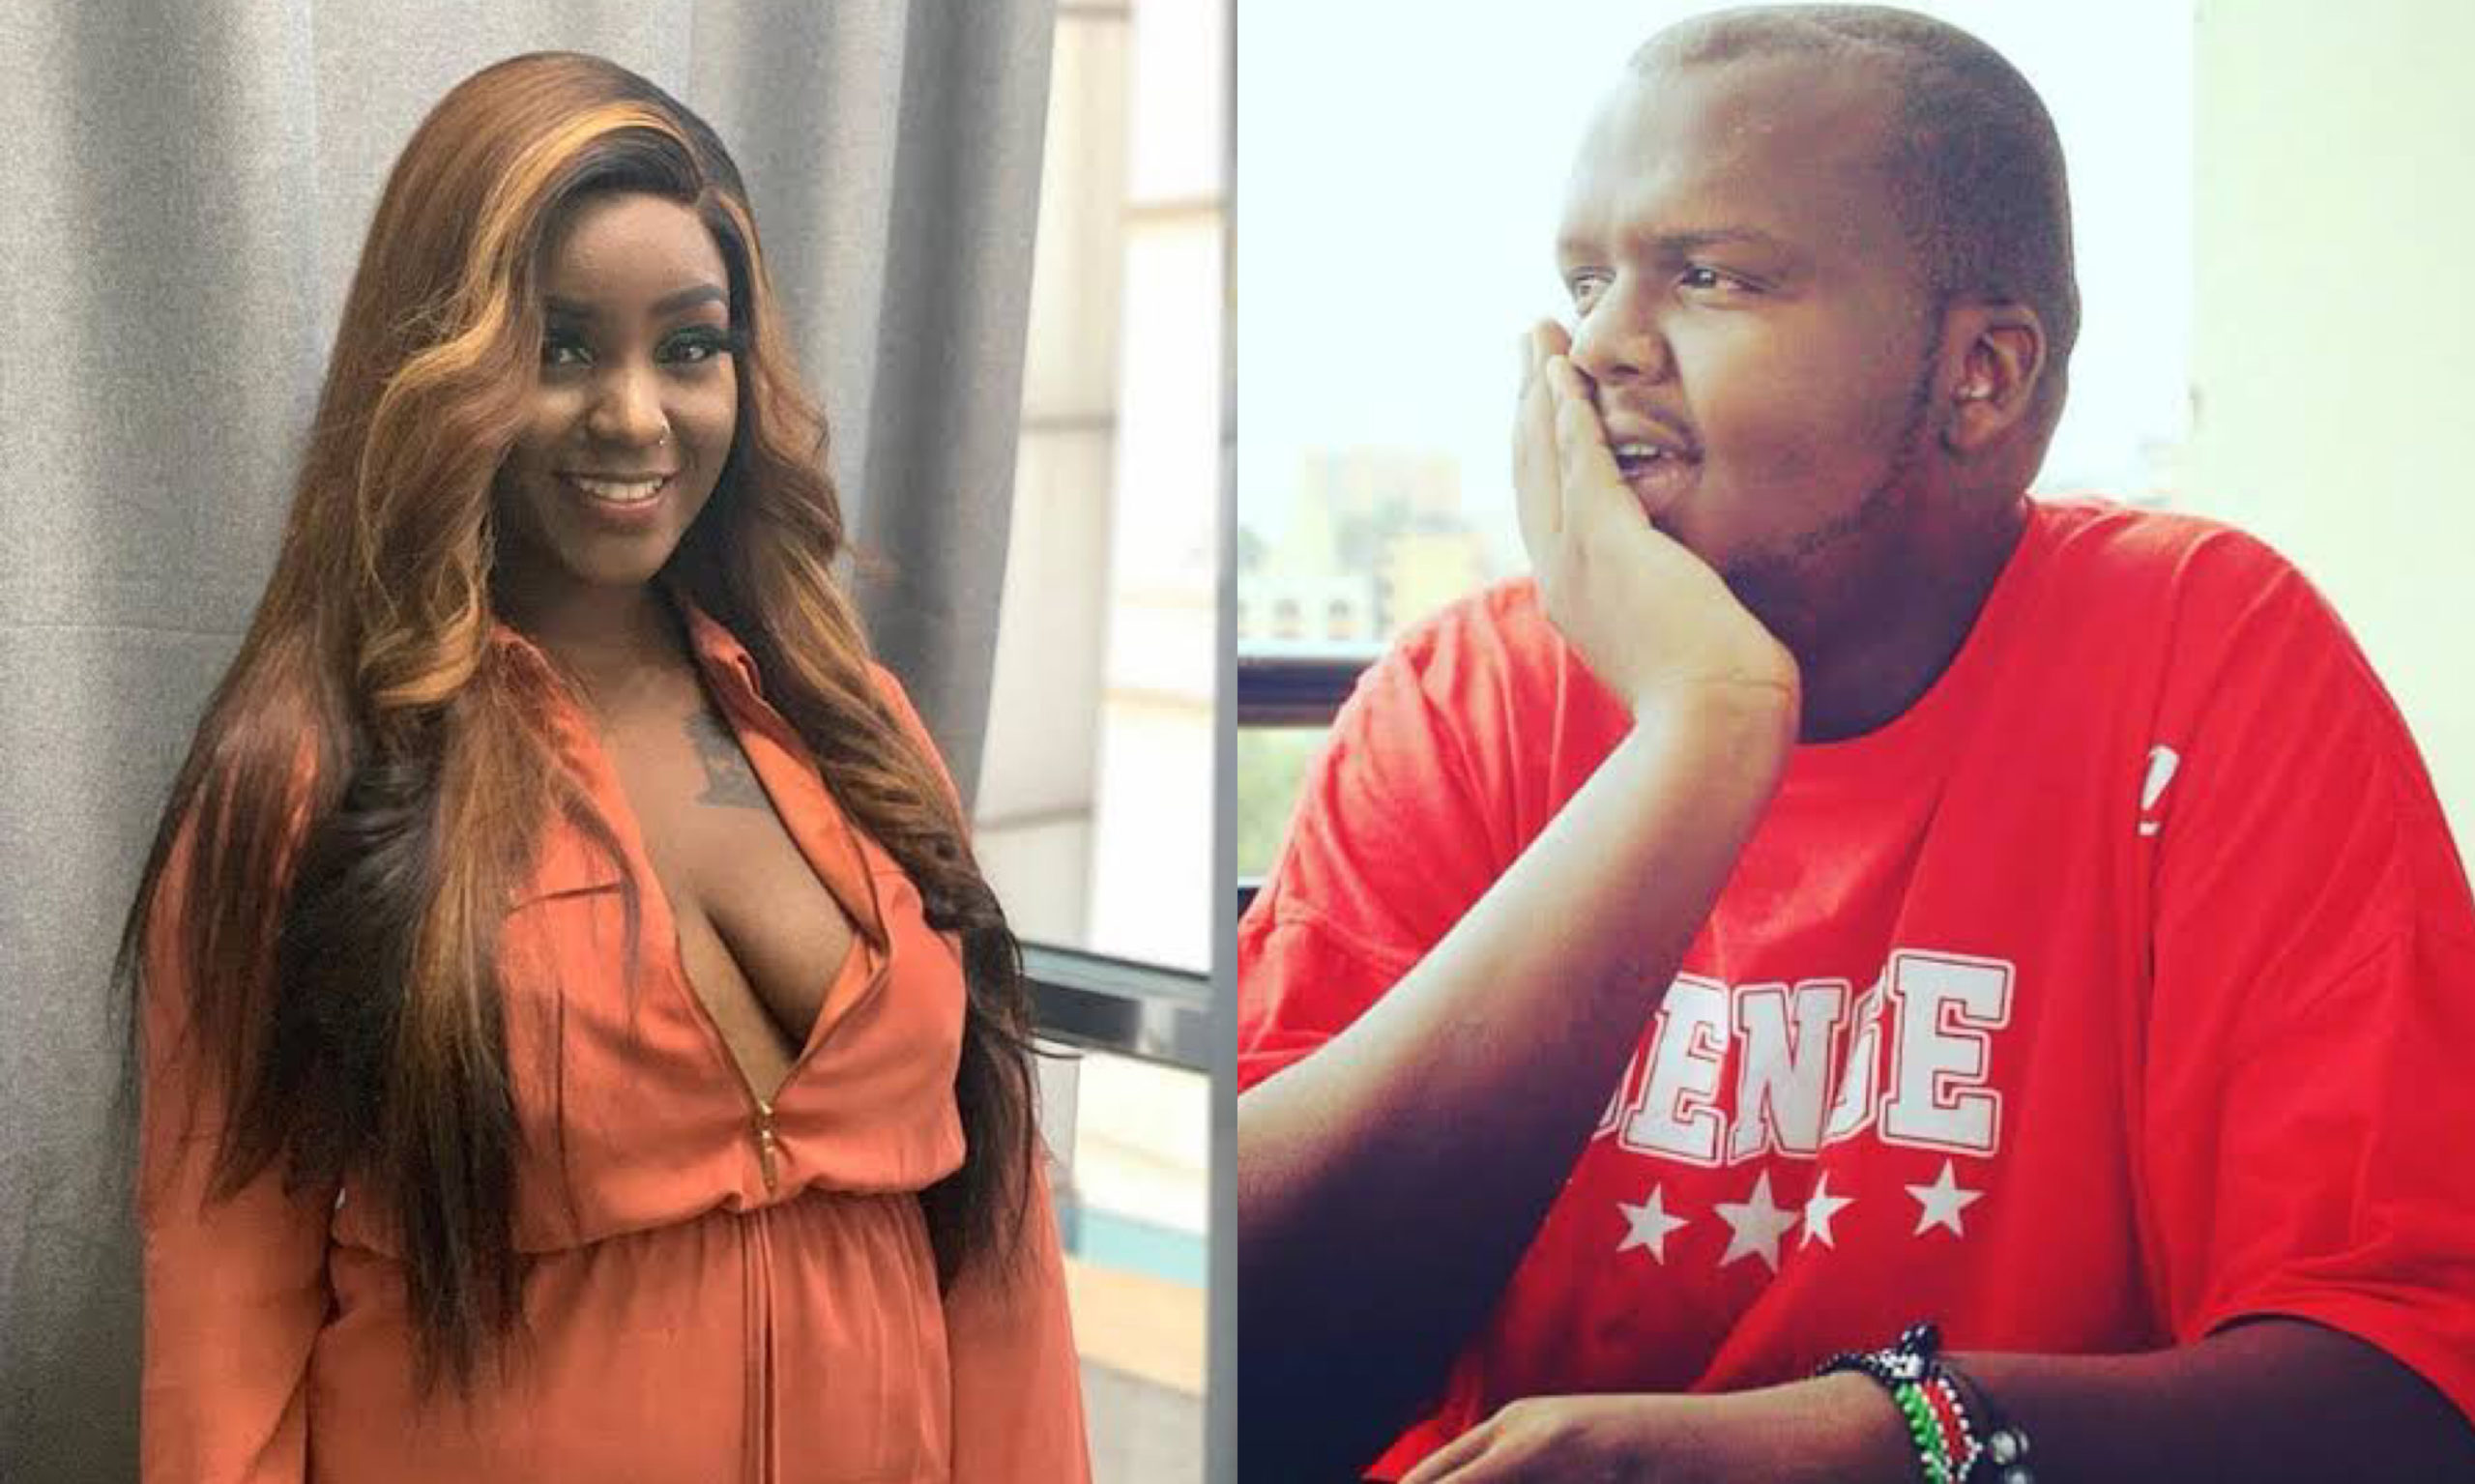 “His part should be deleted!” Shakilla trolls Mejja for disappointing verse in new ‘Nairobi’ hit song